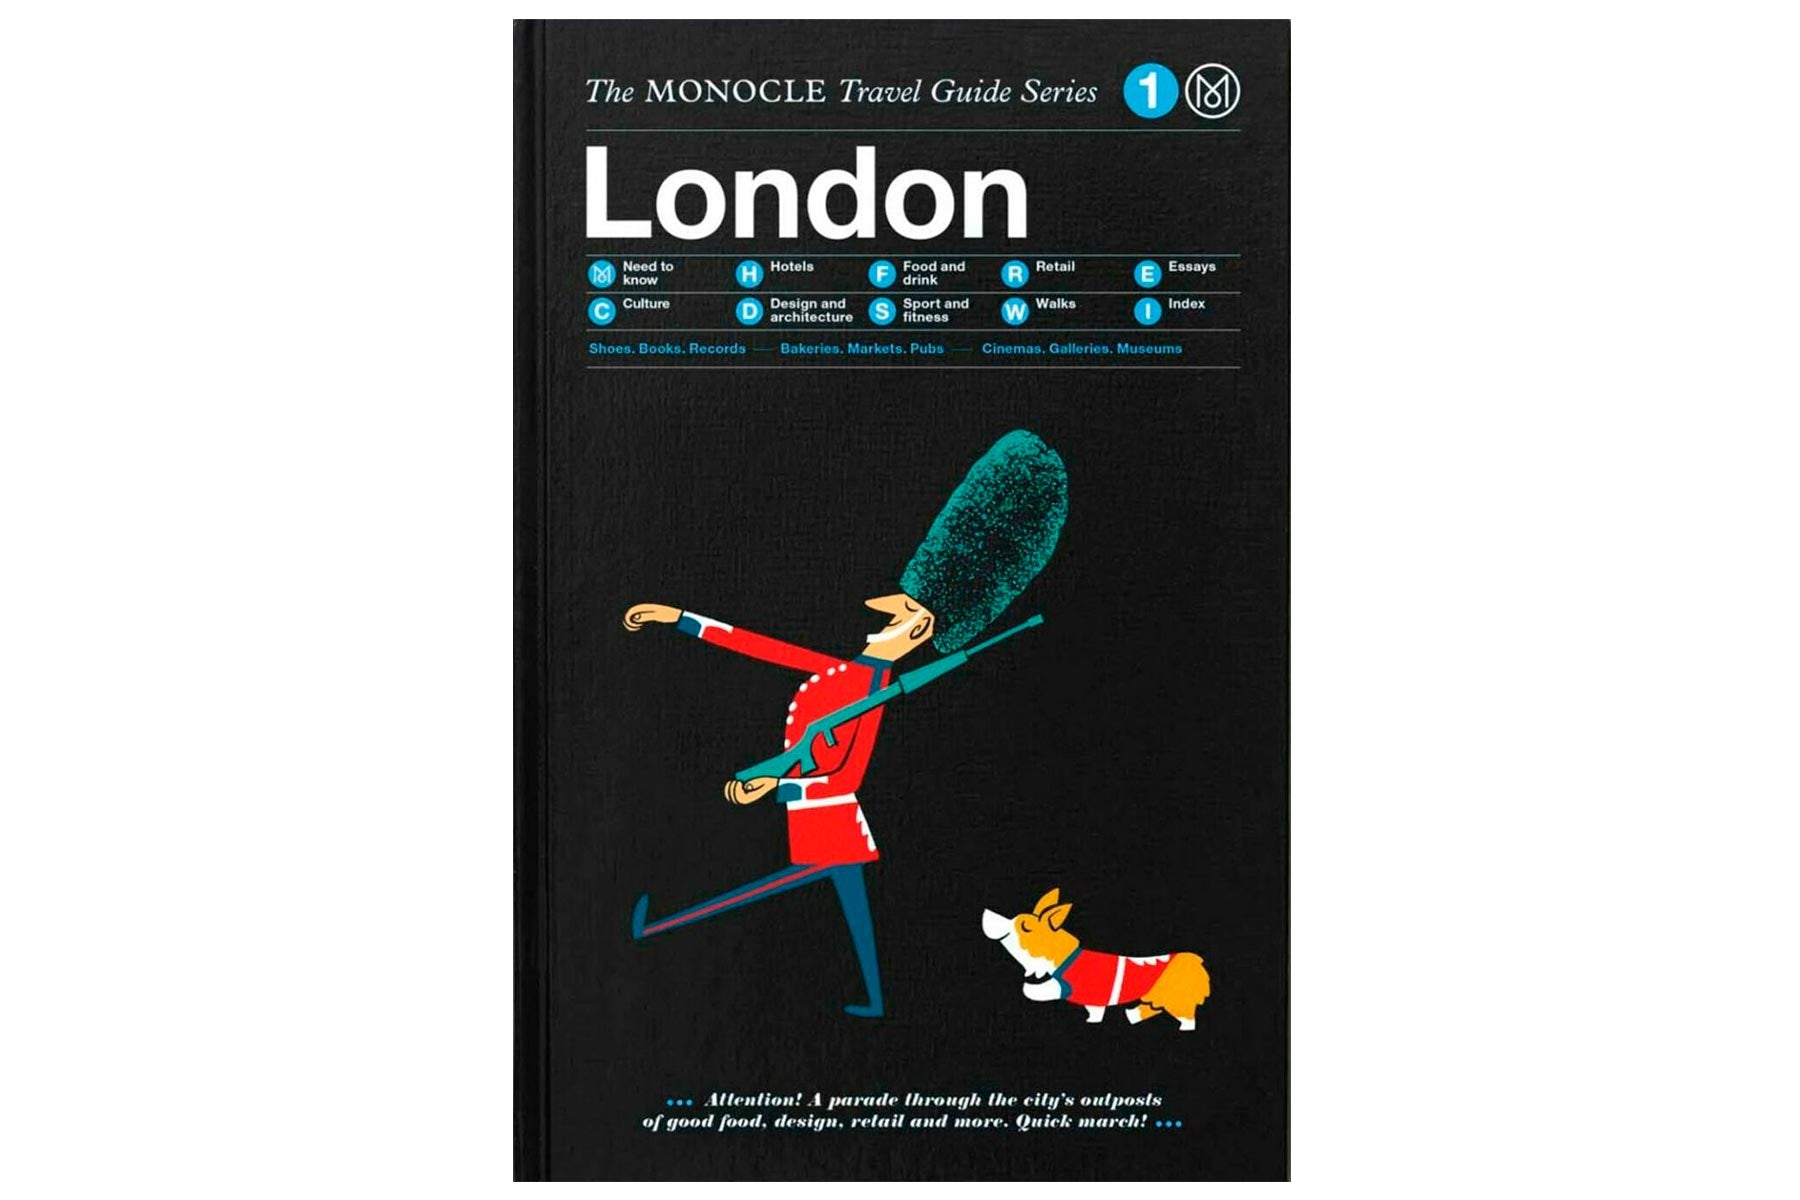 The Monocle Travel Guide - London